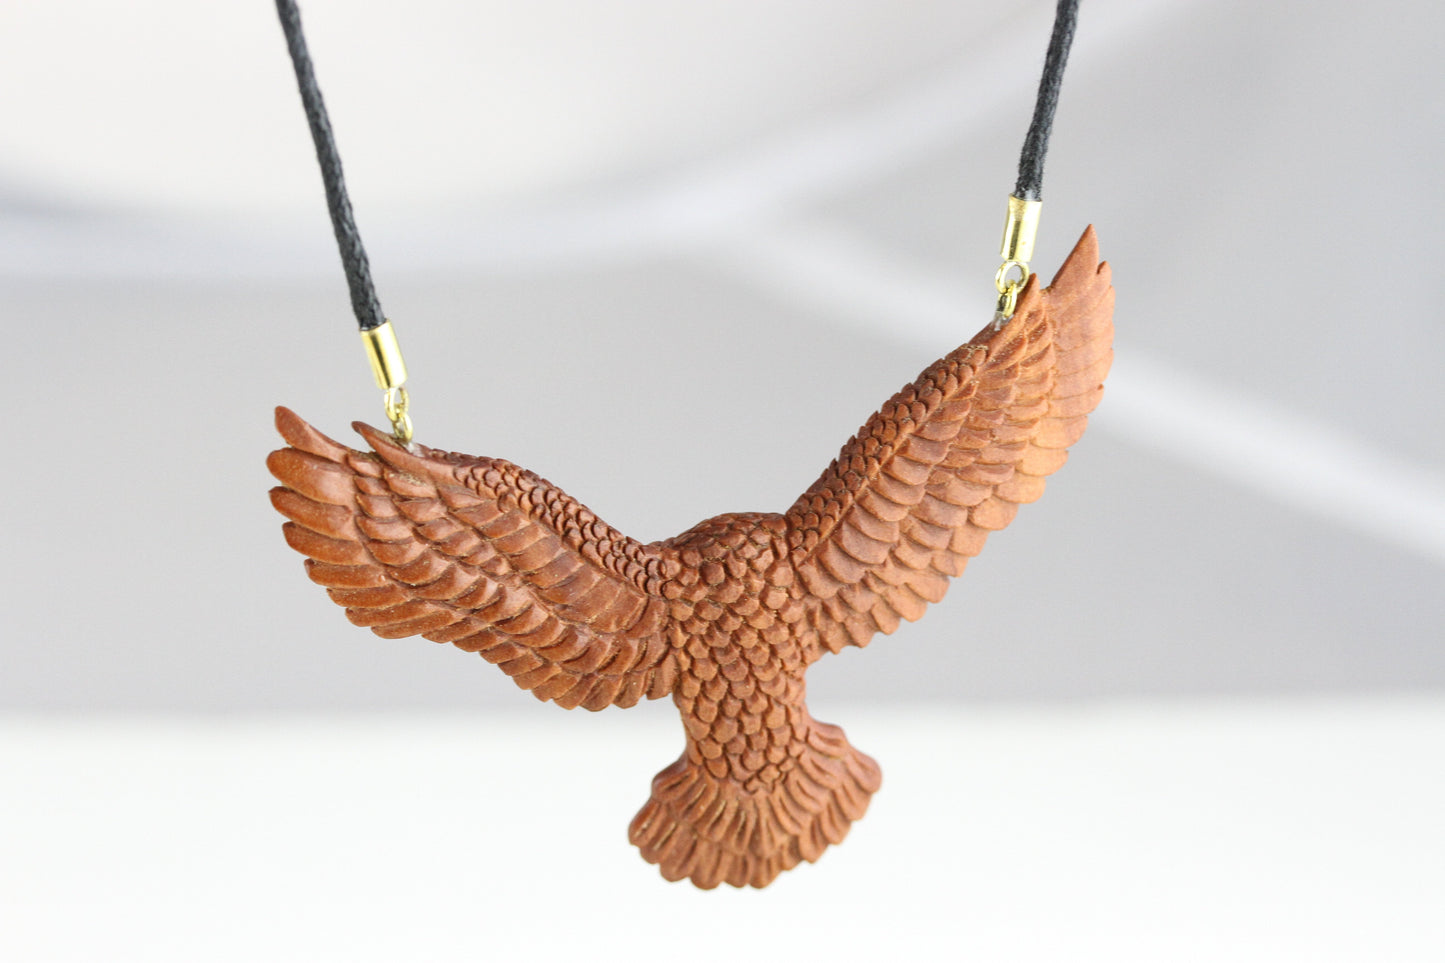 Preying Owl Necklace - Carved Wood Necklace Owl - Z059